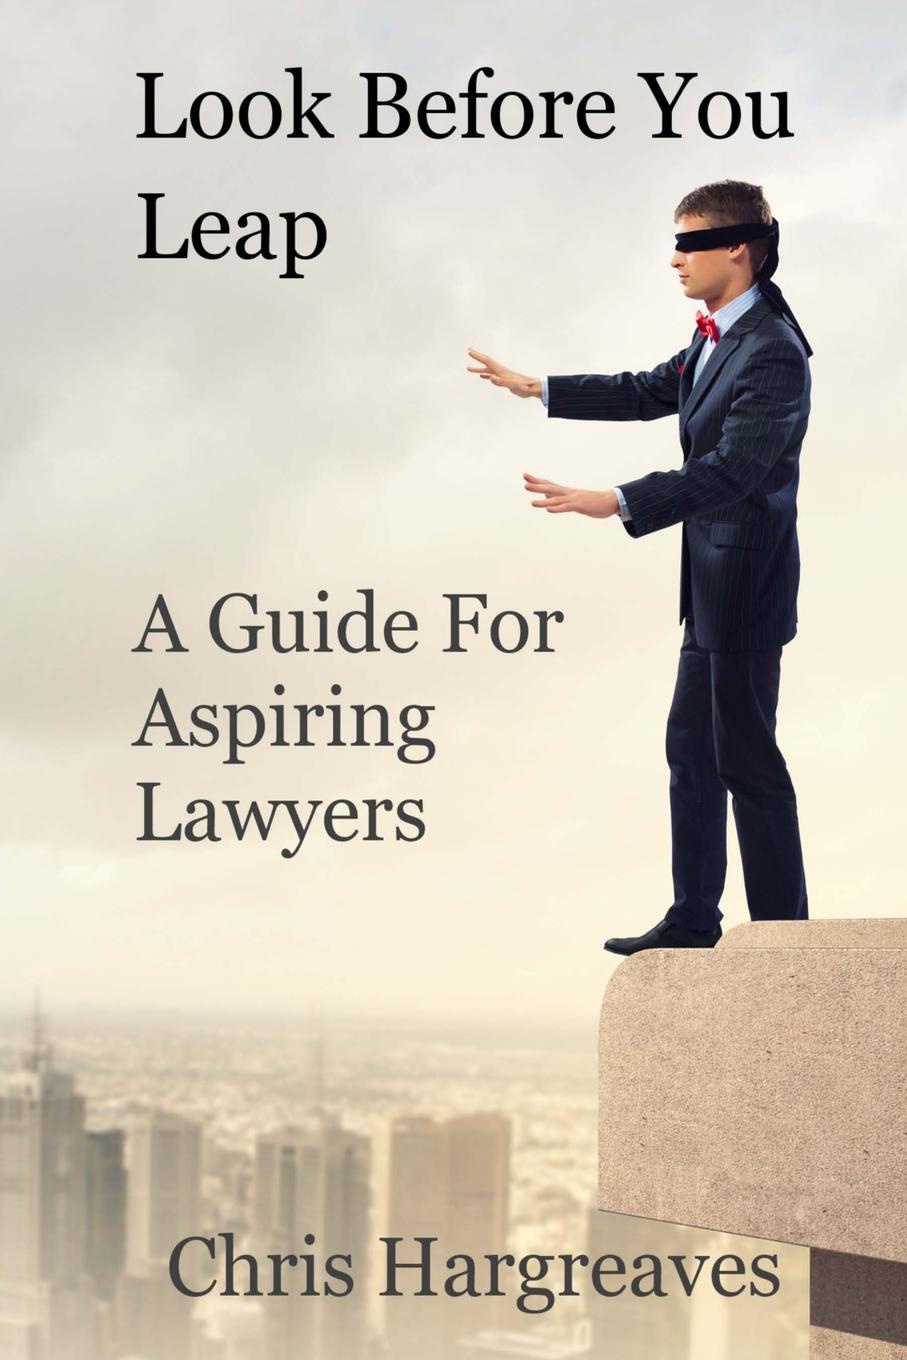 Look Before You Leap. A Guide for Aspiring Lawyers